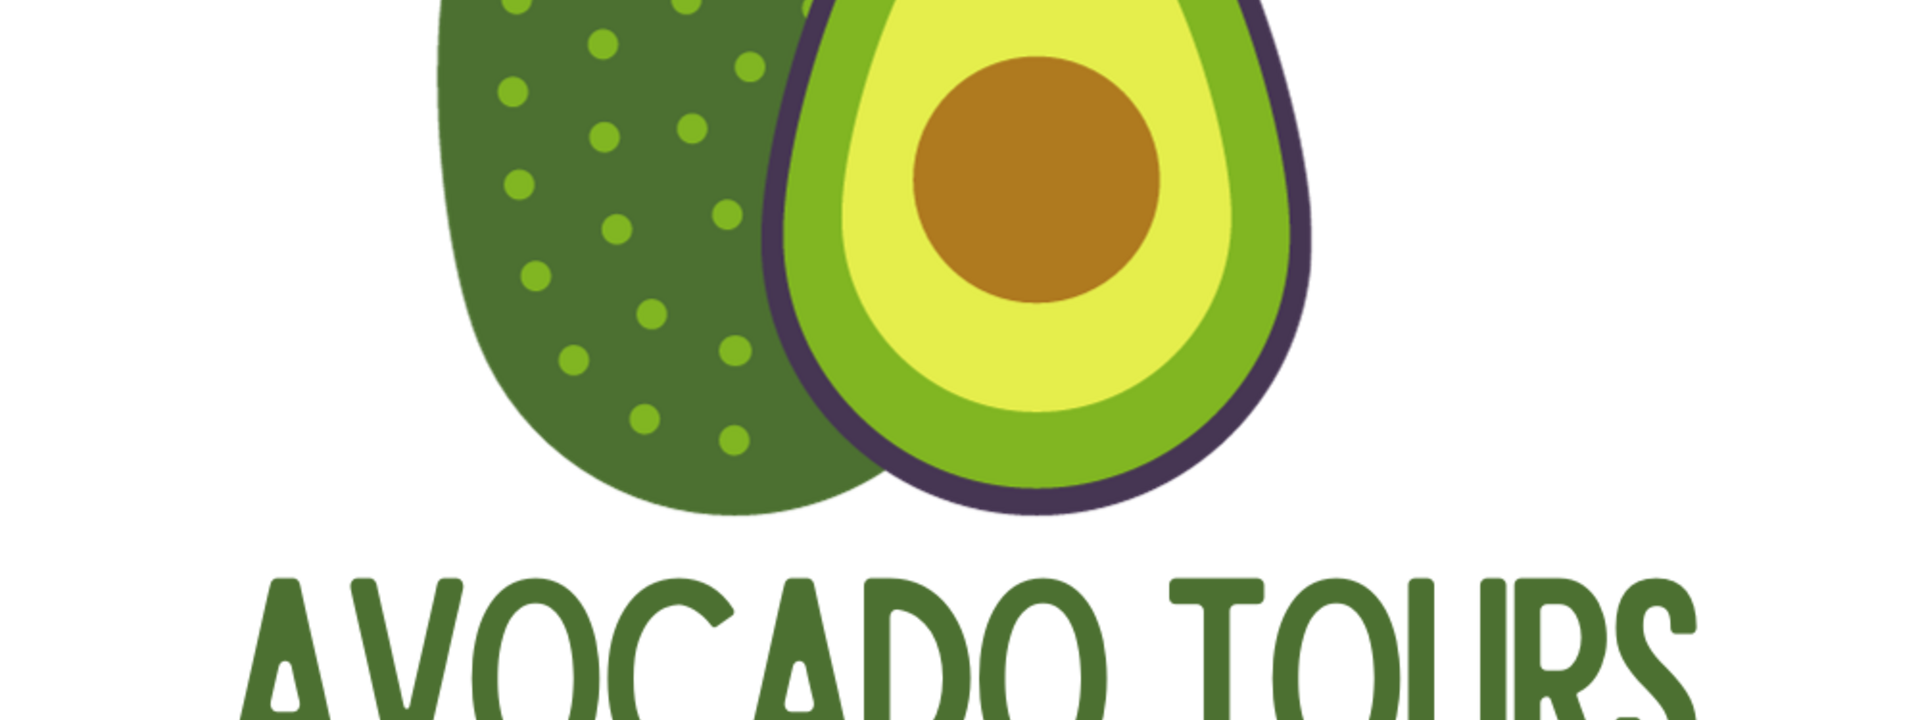 Avo Tours Logo Square High Res.png